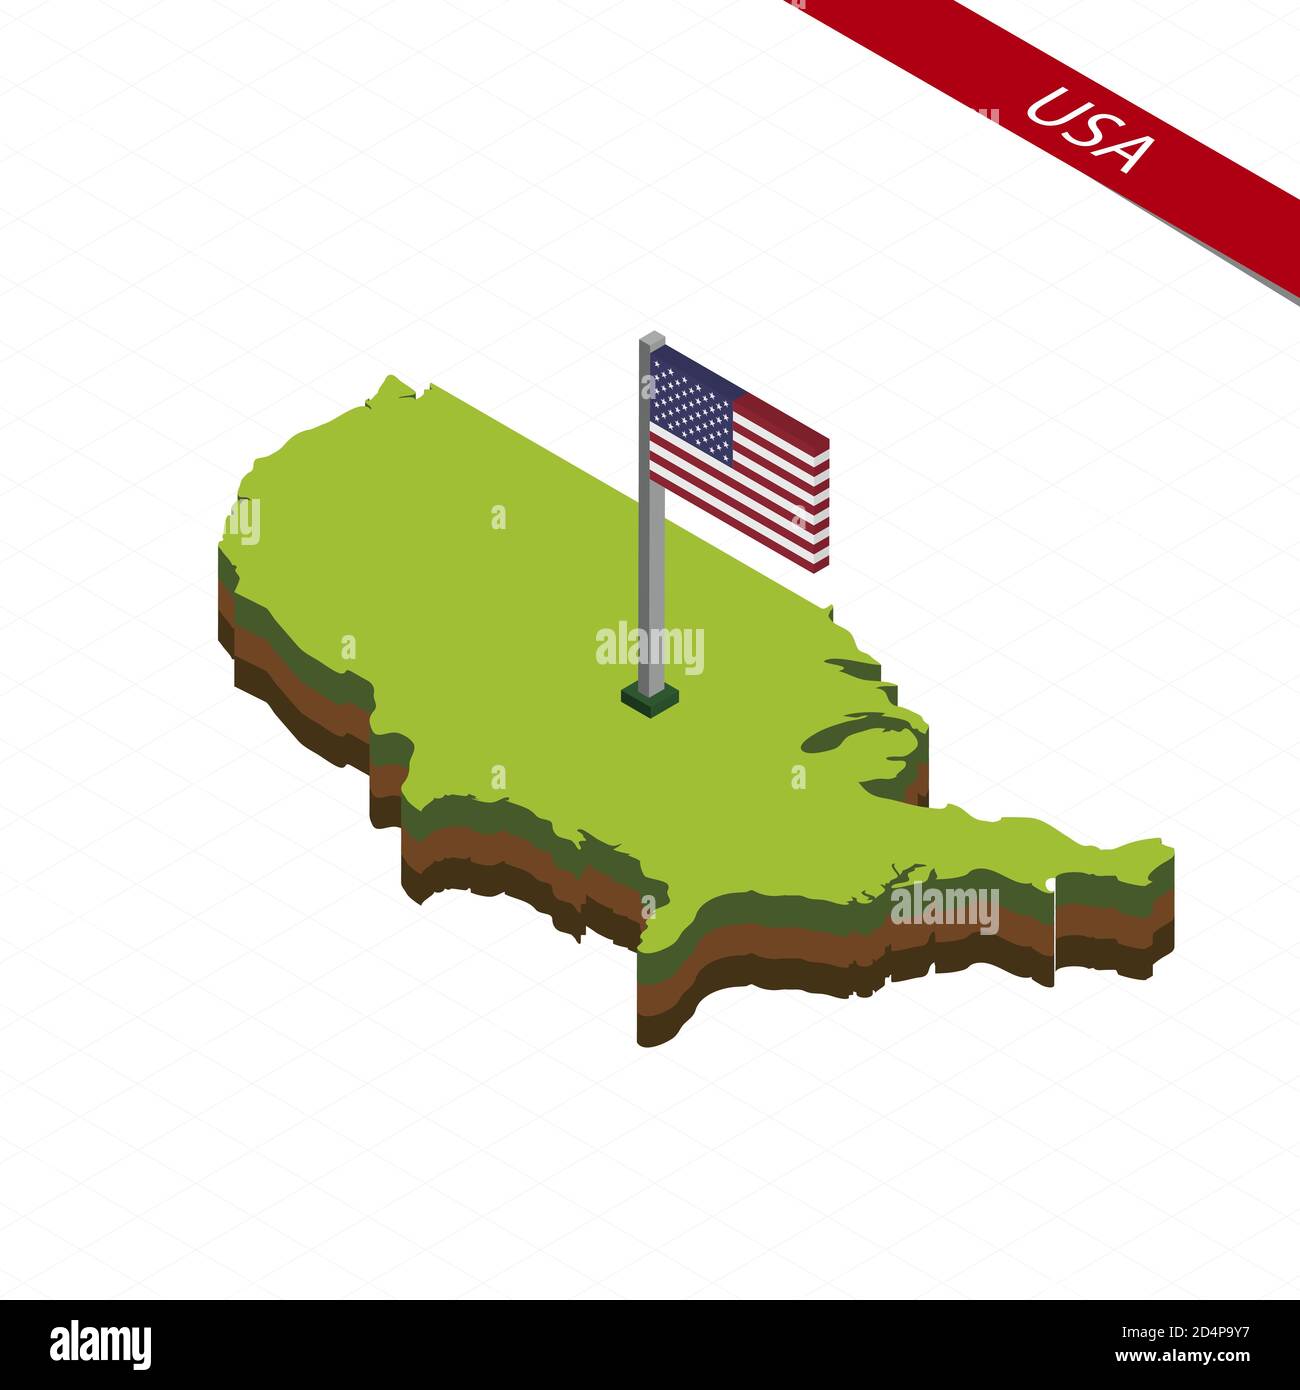 Isometric map and flag of USA. 3D isometric shape of United States of America. Vector Illustration. Stock Vector